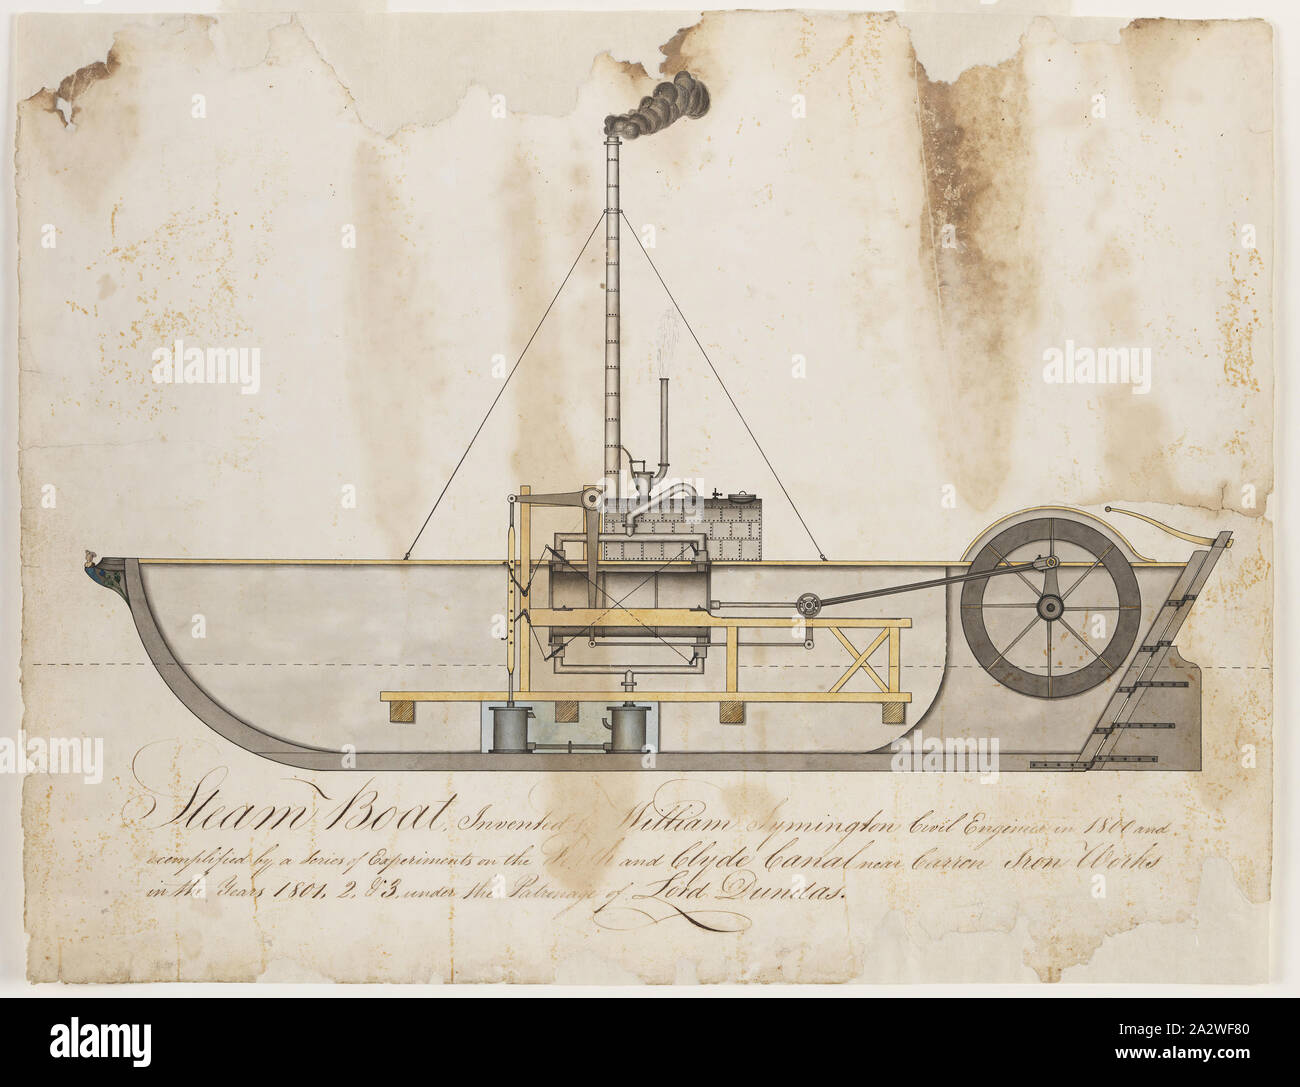 Engineering Drawing - William Symington, 'Charlotte Dundas', Steam Boat Invented for Lord Dundas, 1801-1803, Ink and water-colour technical drawing showing a longitudinal cross-sectional elevation of the fourth and final experimental paddlesteamer built under the direction of the Scottish engineer and inventor, William Symington, C.E.. The vessel depicted is the second of two steam-powered paddleboats designed by Symington for the Forth and Clyde Navigation Company at the instigation of Lord Dundas (Sir Stock Photo